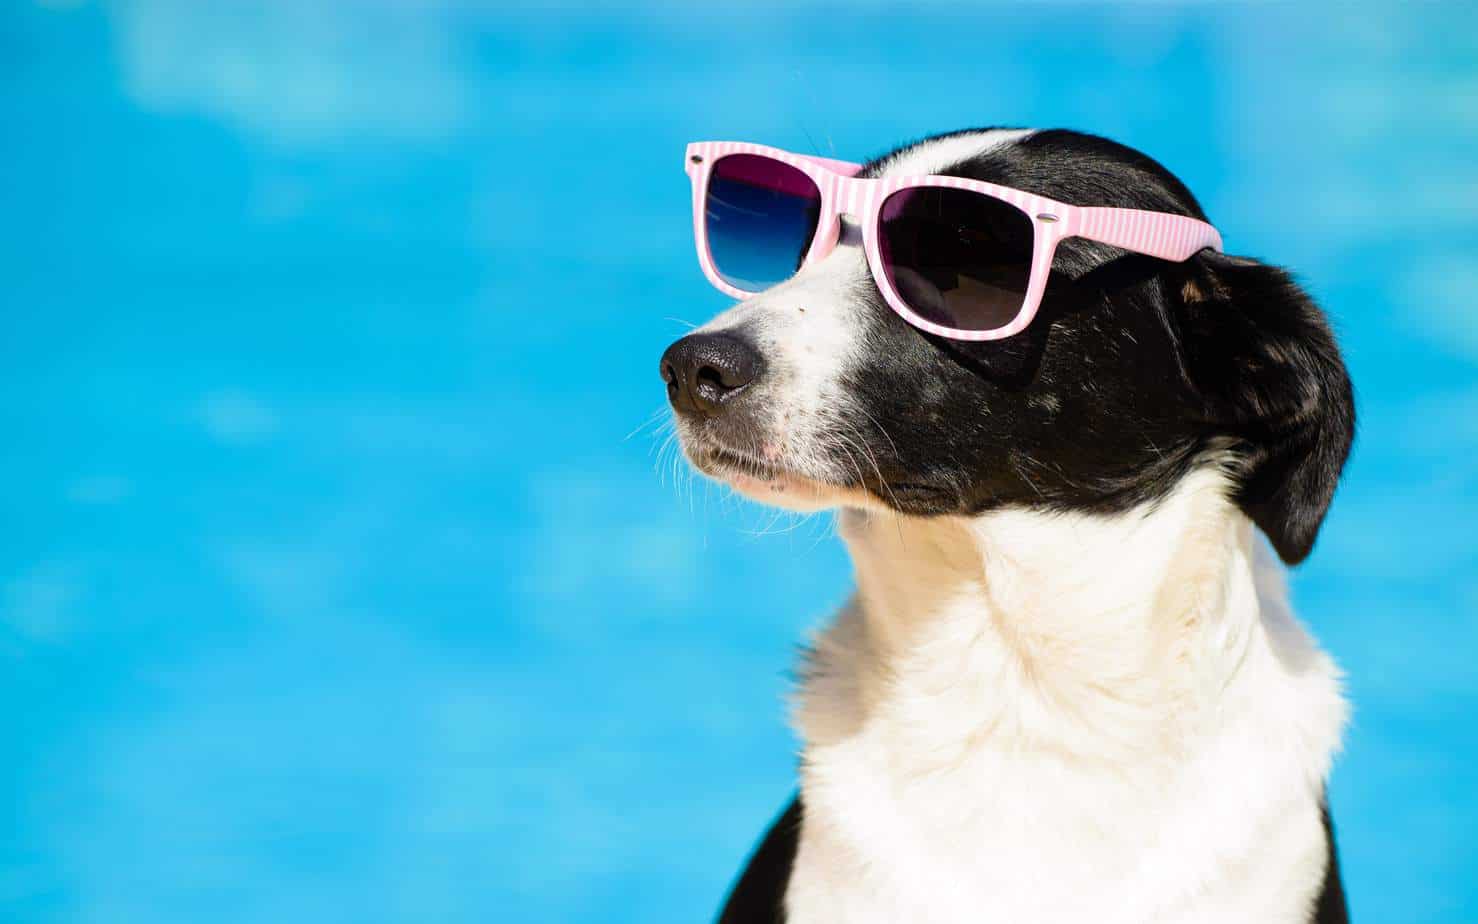 Use basic dog summer safety rules to keep your pup healthy in summer's heat. Make sure he always has lots of water and shade. Some dogs like this black and white mixed breed even enjoy wearing sunglasses to protect their eyes.